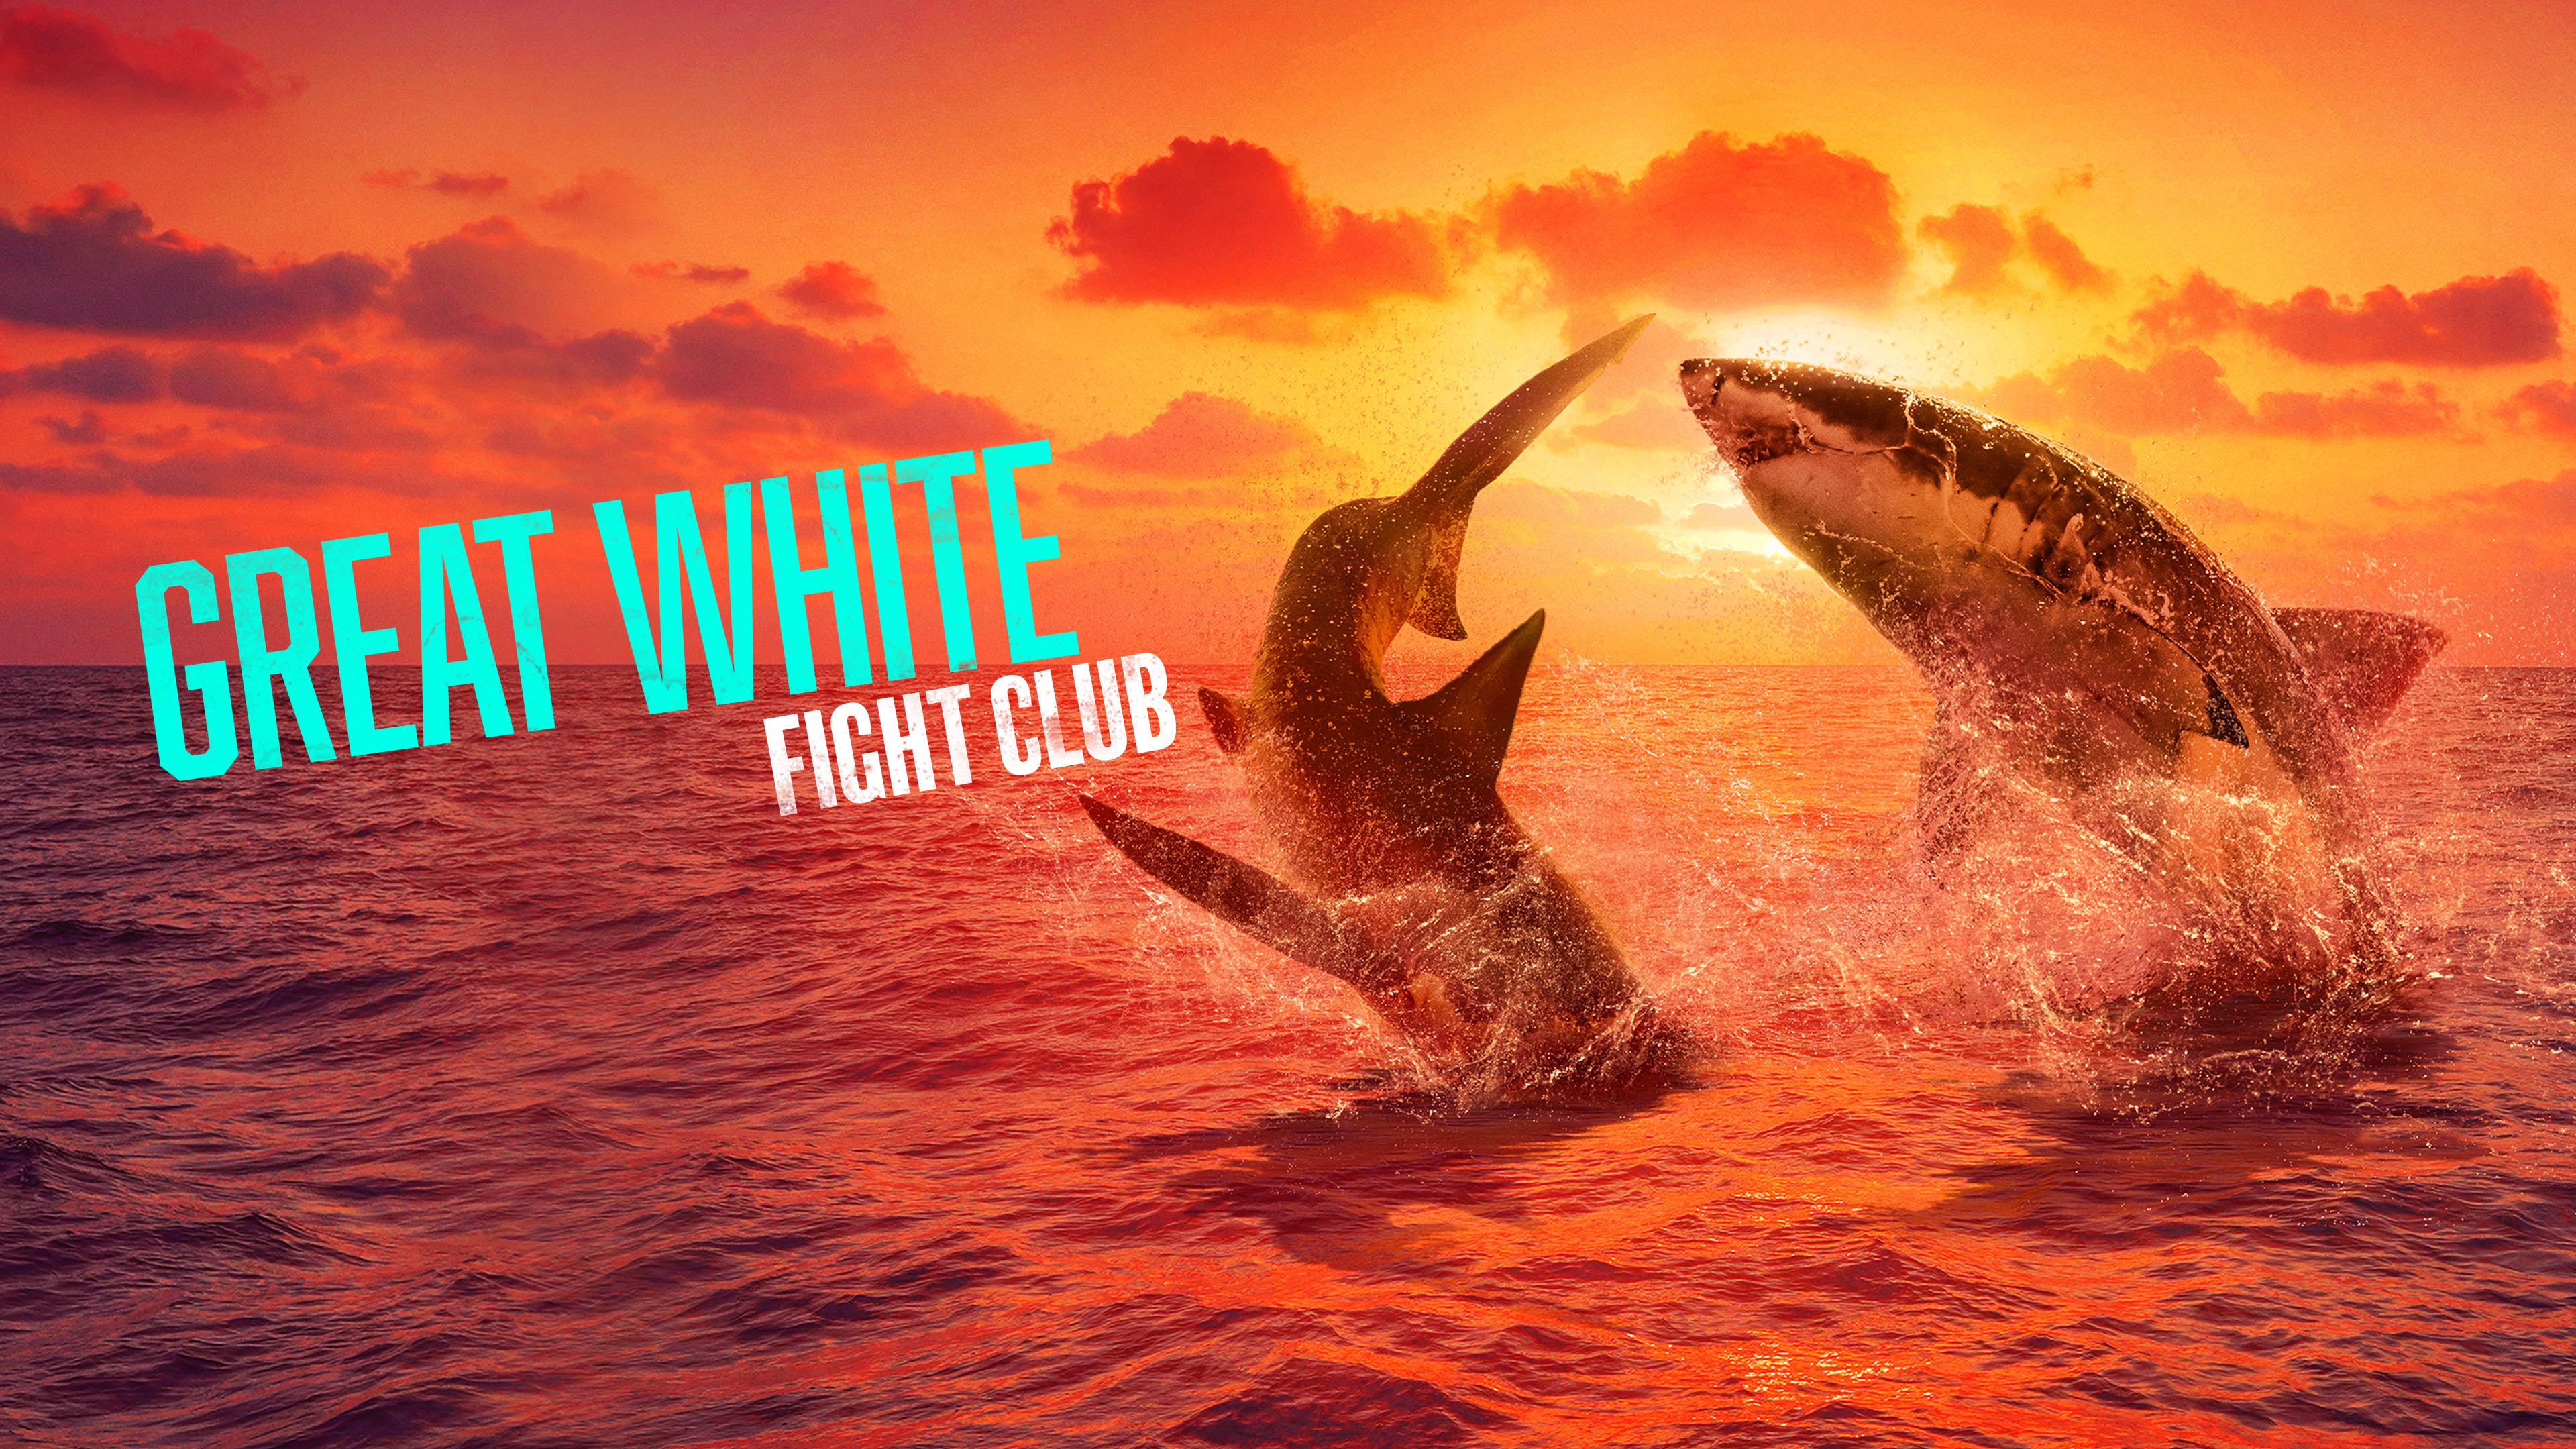 Watch Great White Fight Club Streaming Online on Philo (Free Trial)